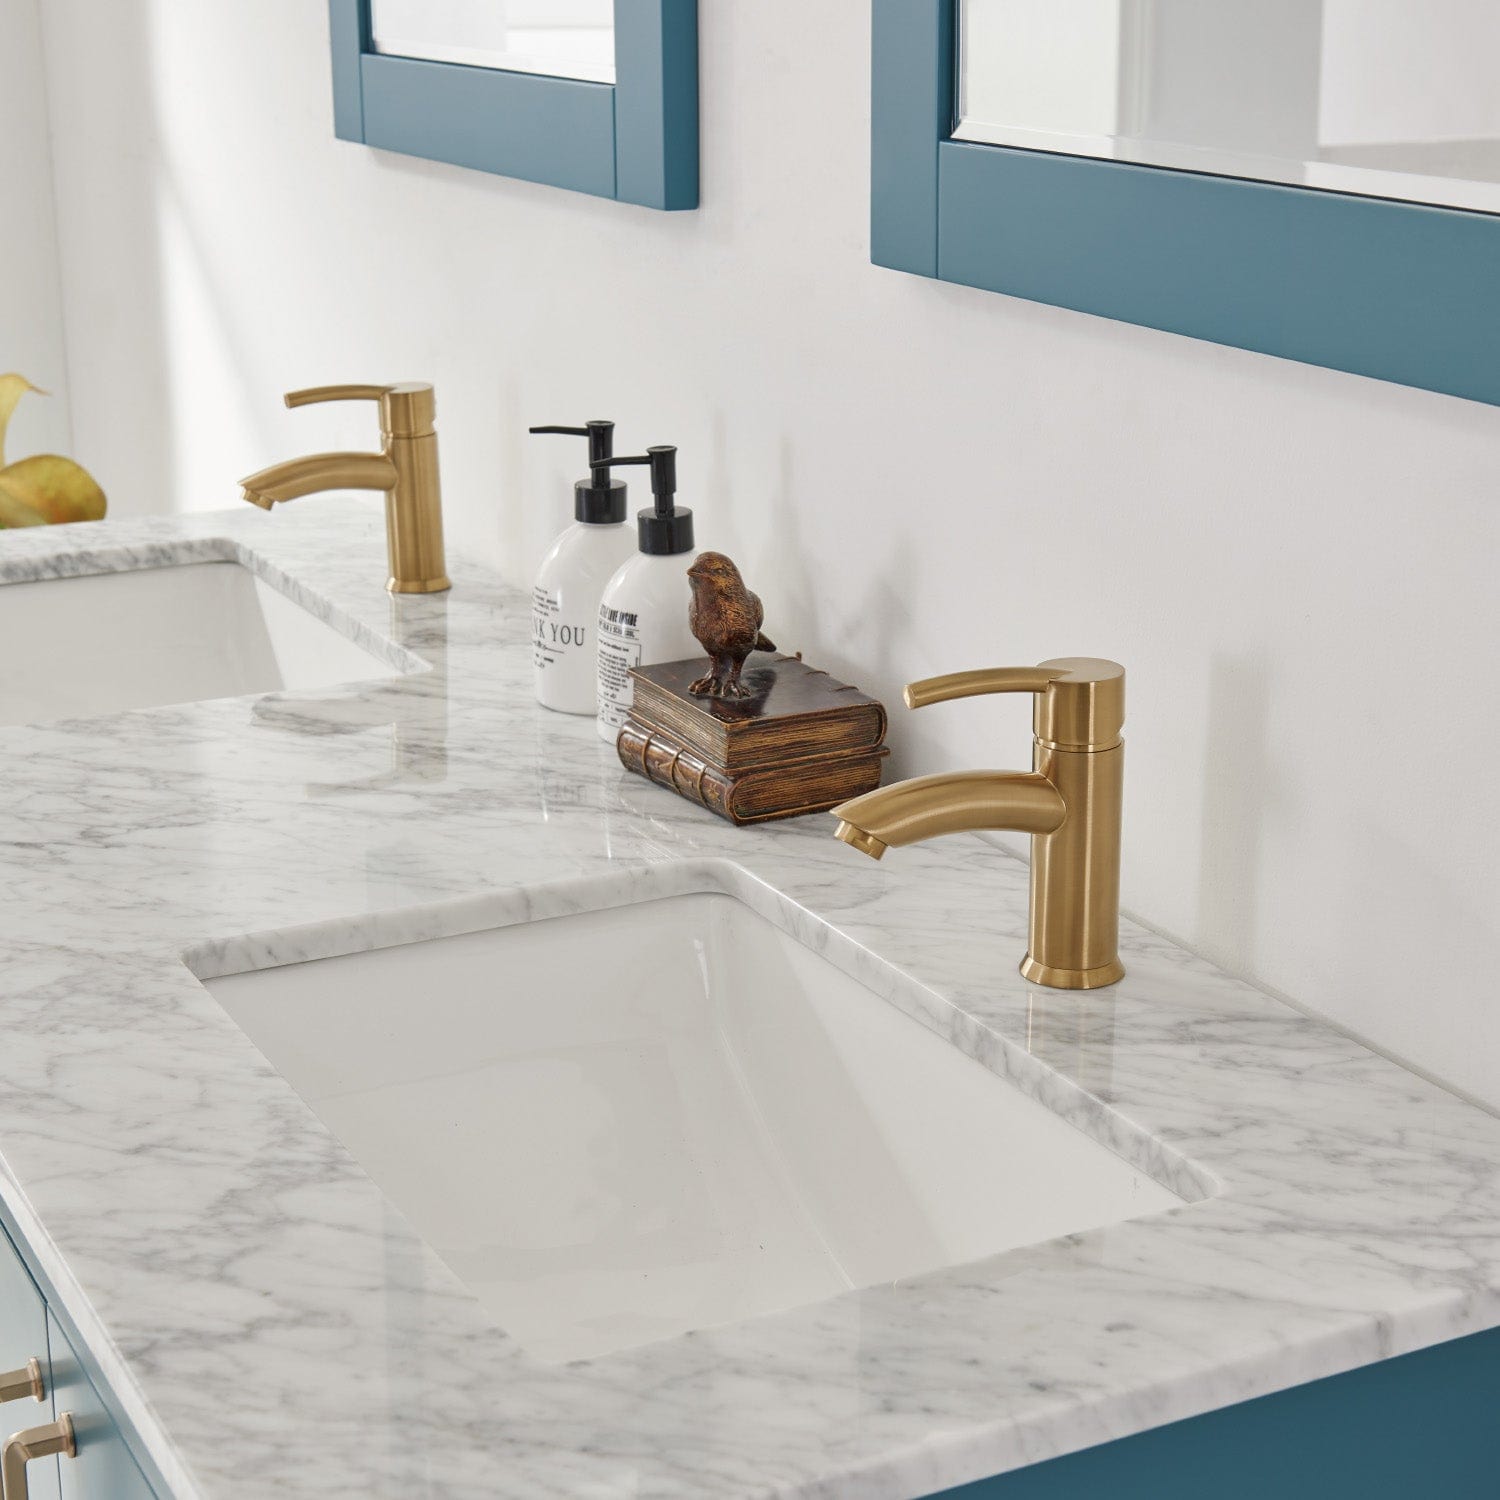 Altair Sutton 60" Double Bathroom Vanity Set in Royal Green and Carrara White Marble Countertop with Mirror 541060-RG-CA - Molaix631112971959Vanity541060-RG-CA